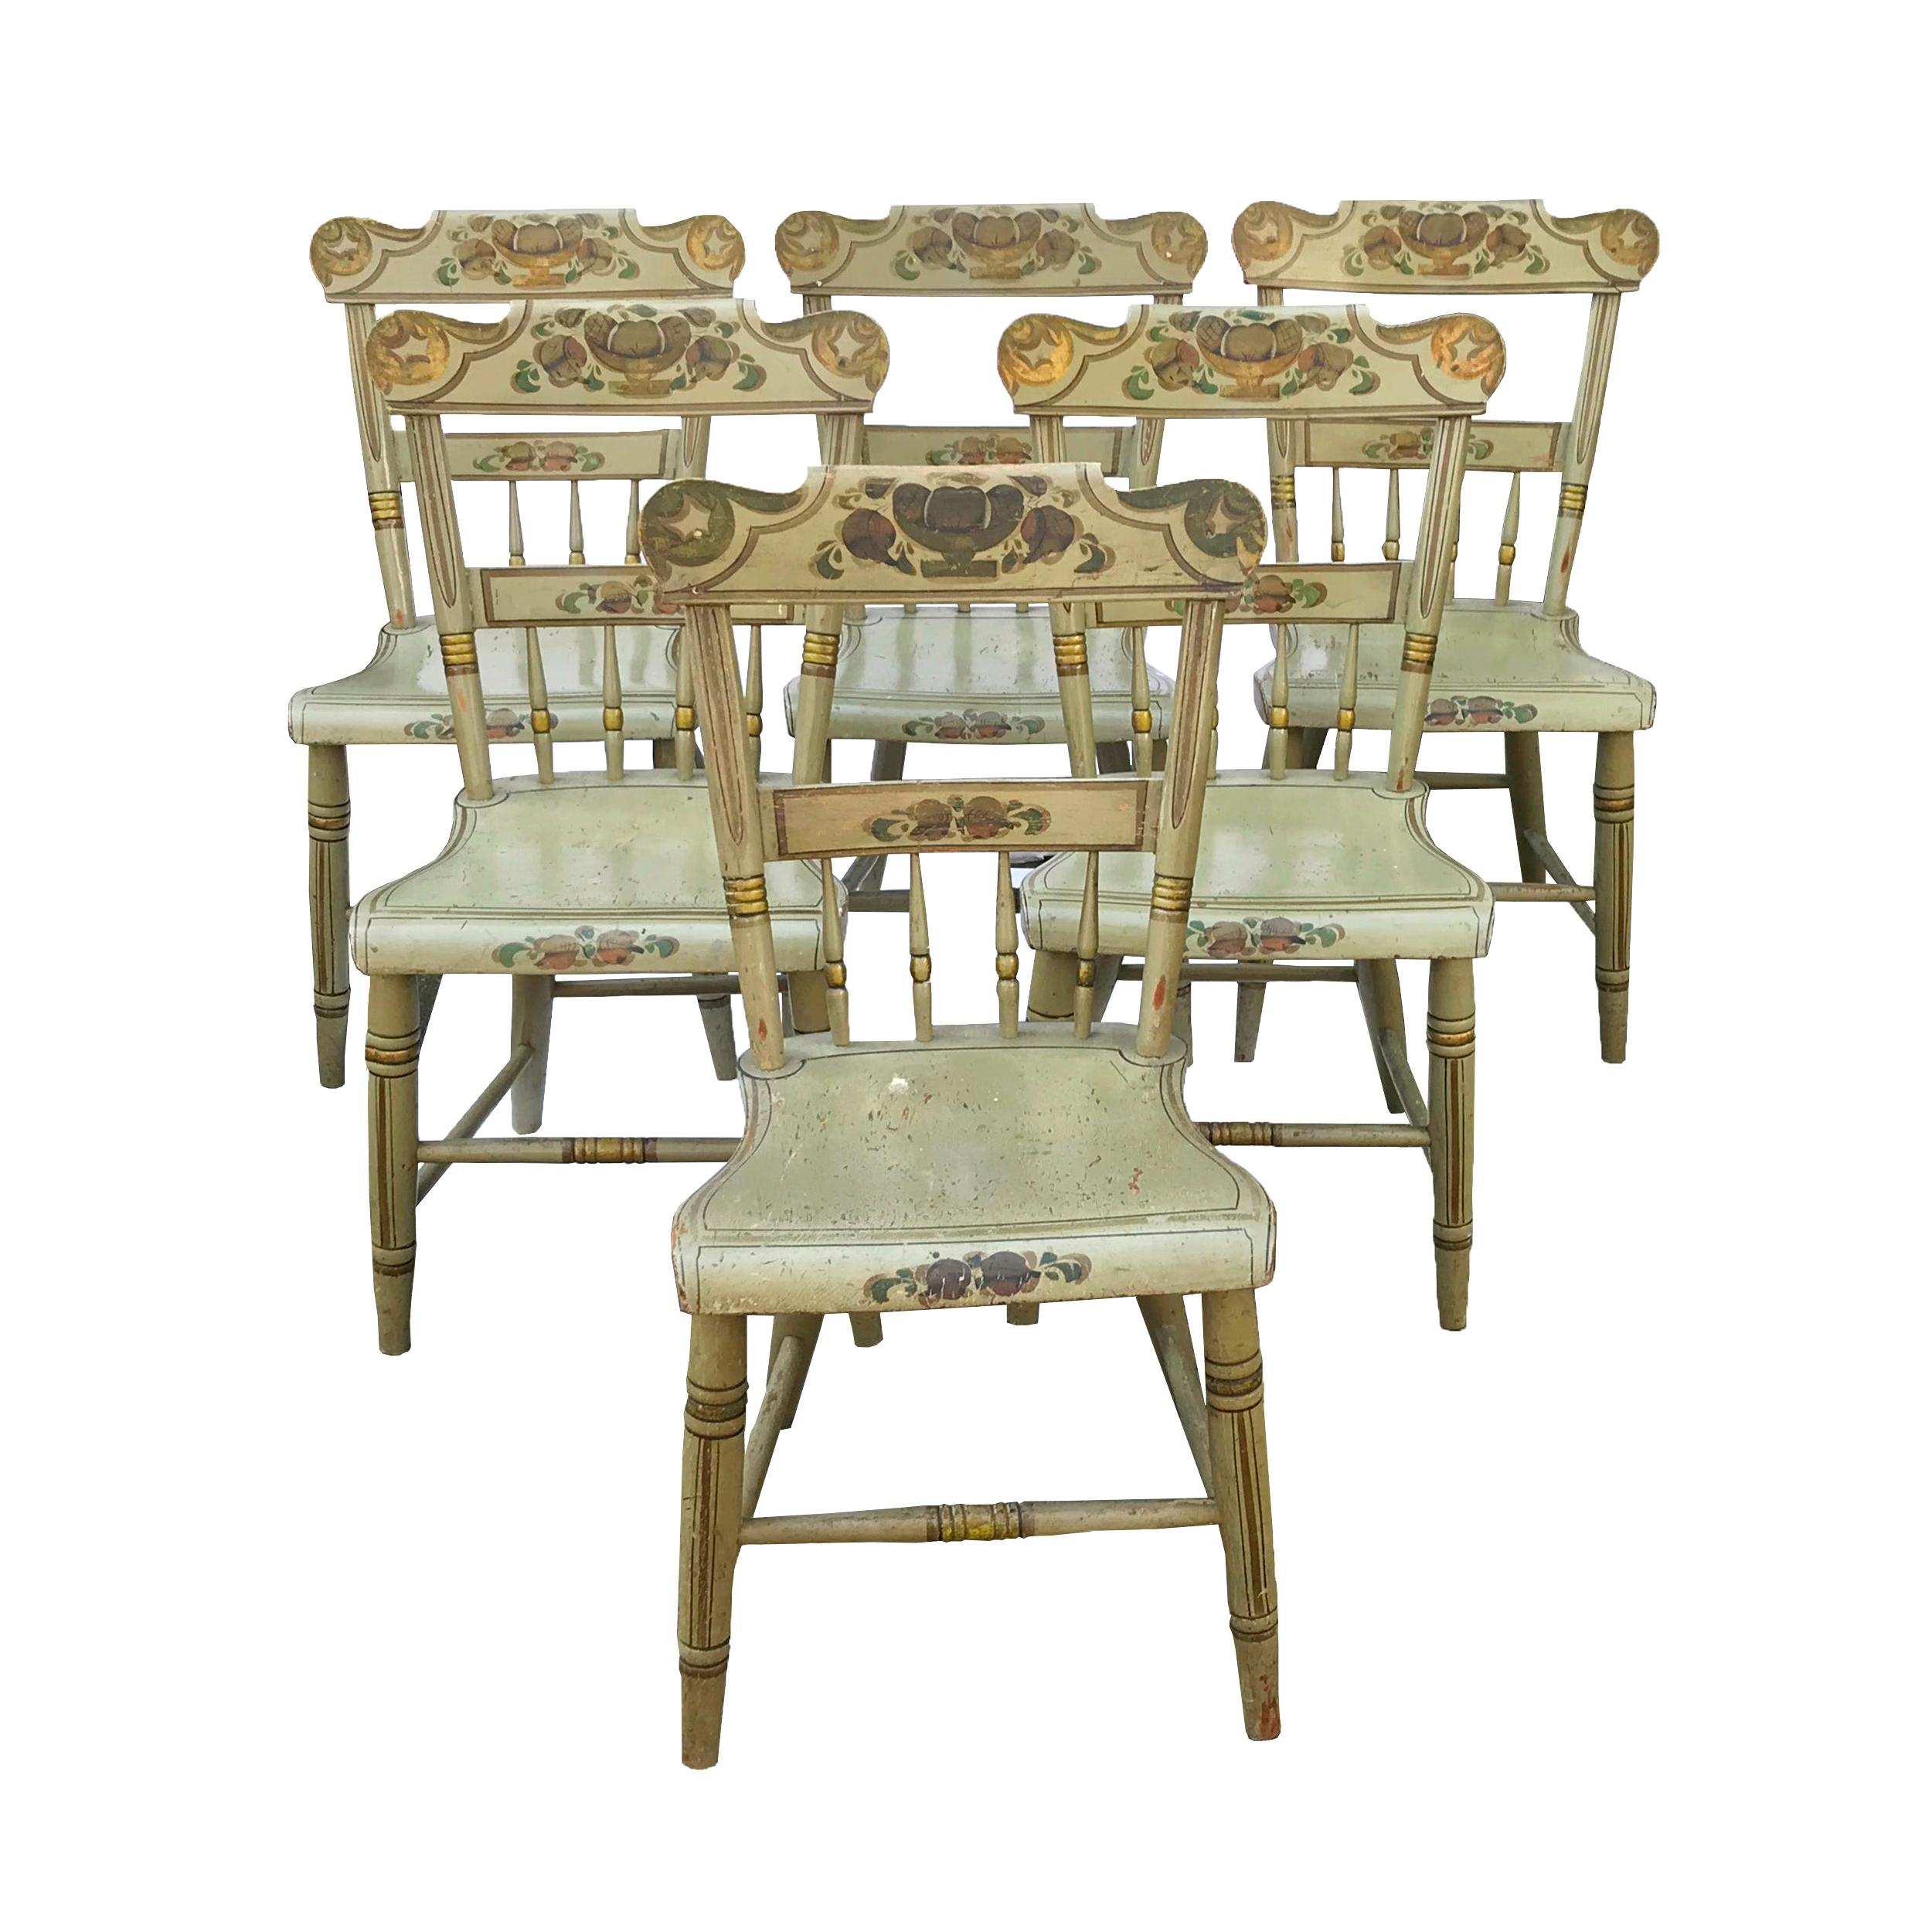 Set of Six Paint Decorated Plank Seat Chairs, circa 1860